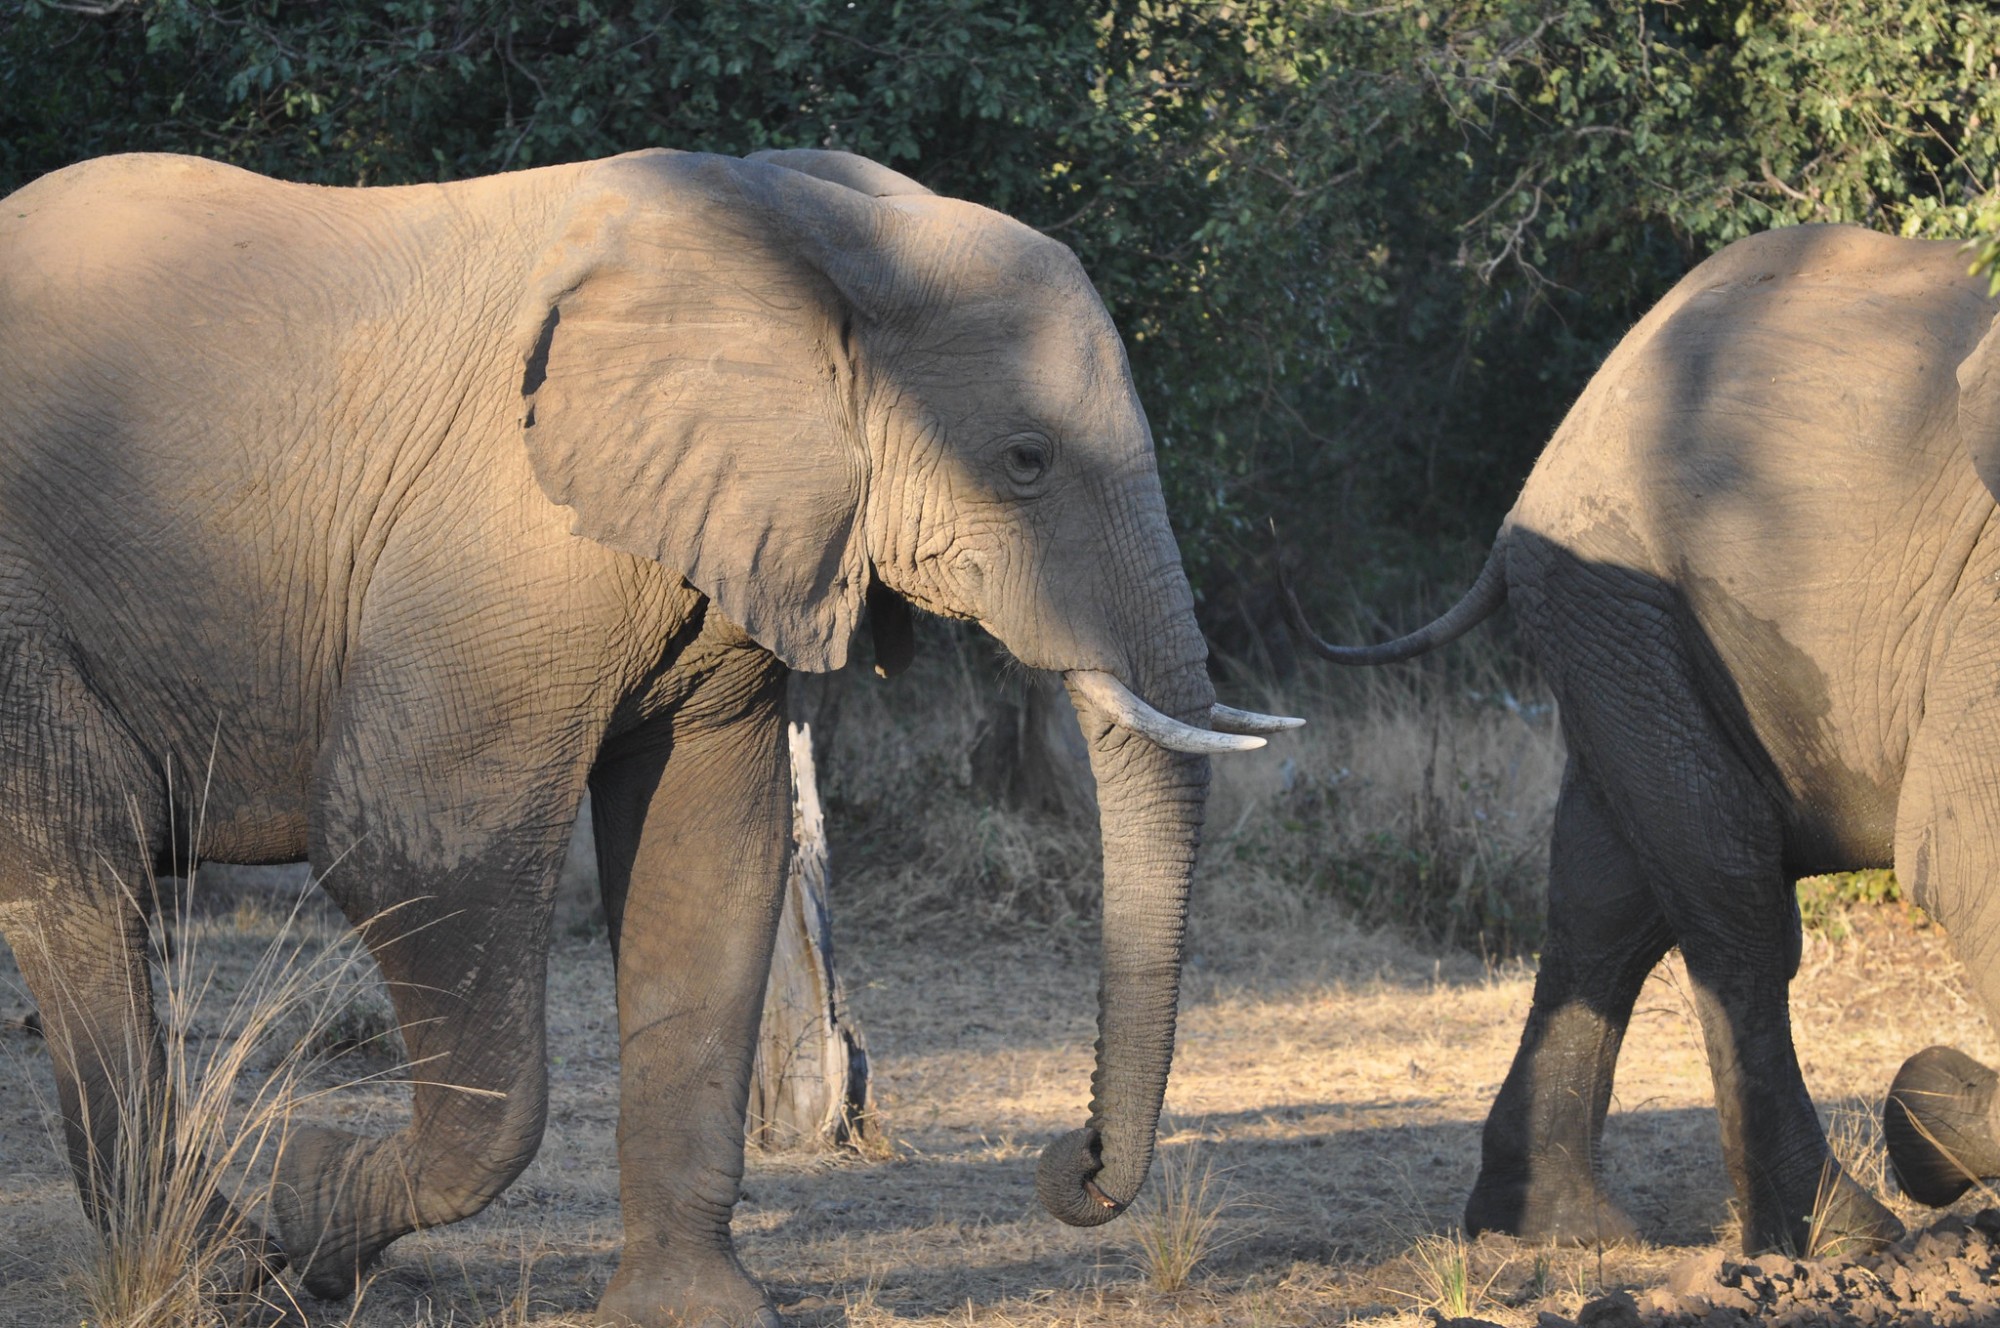 Moving forward, researchers aim to explore the impact of social bonds on elephant communication in natural habitats and further investigate the nuanced meanings and functions of different gestures and multimodal combinations.